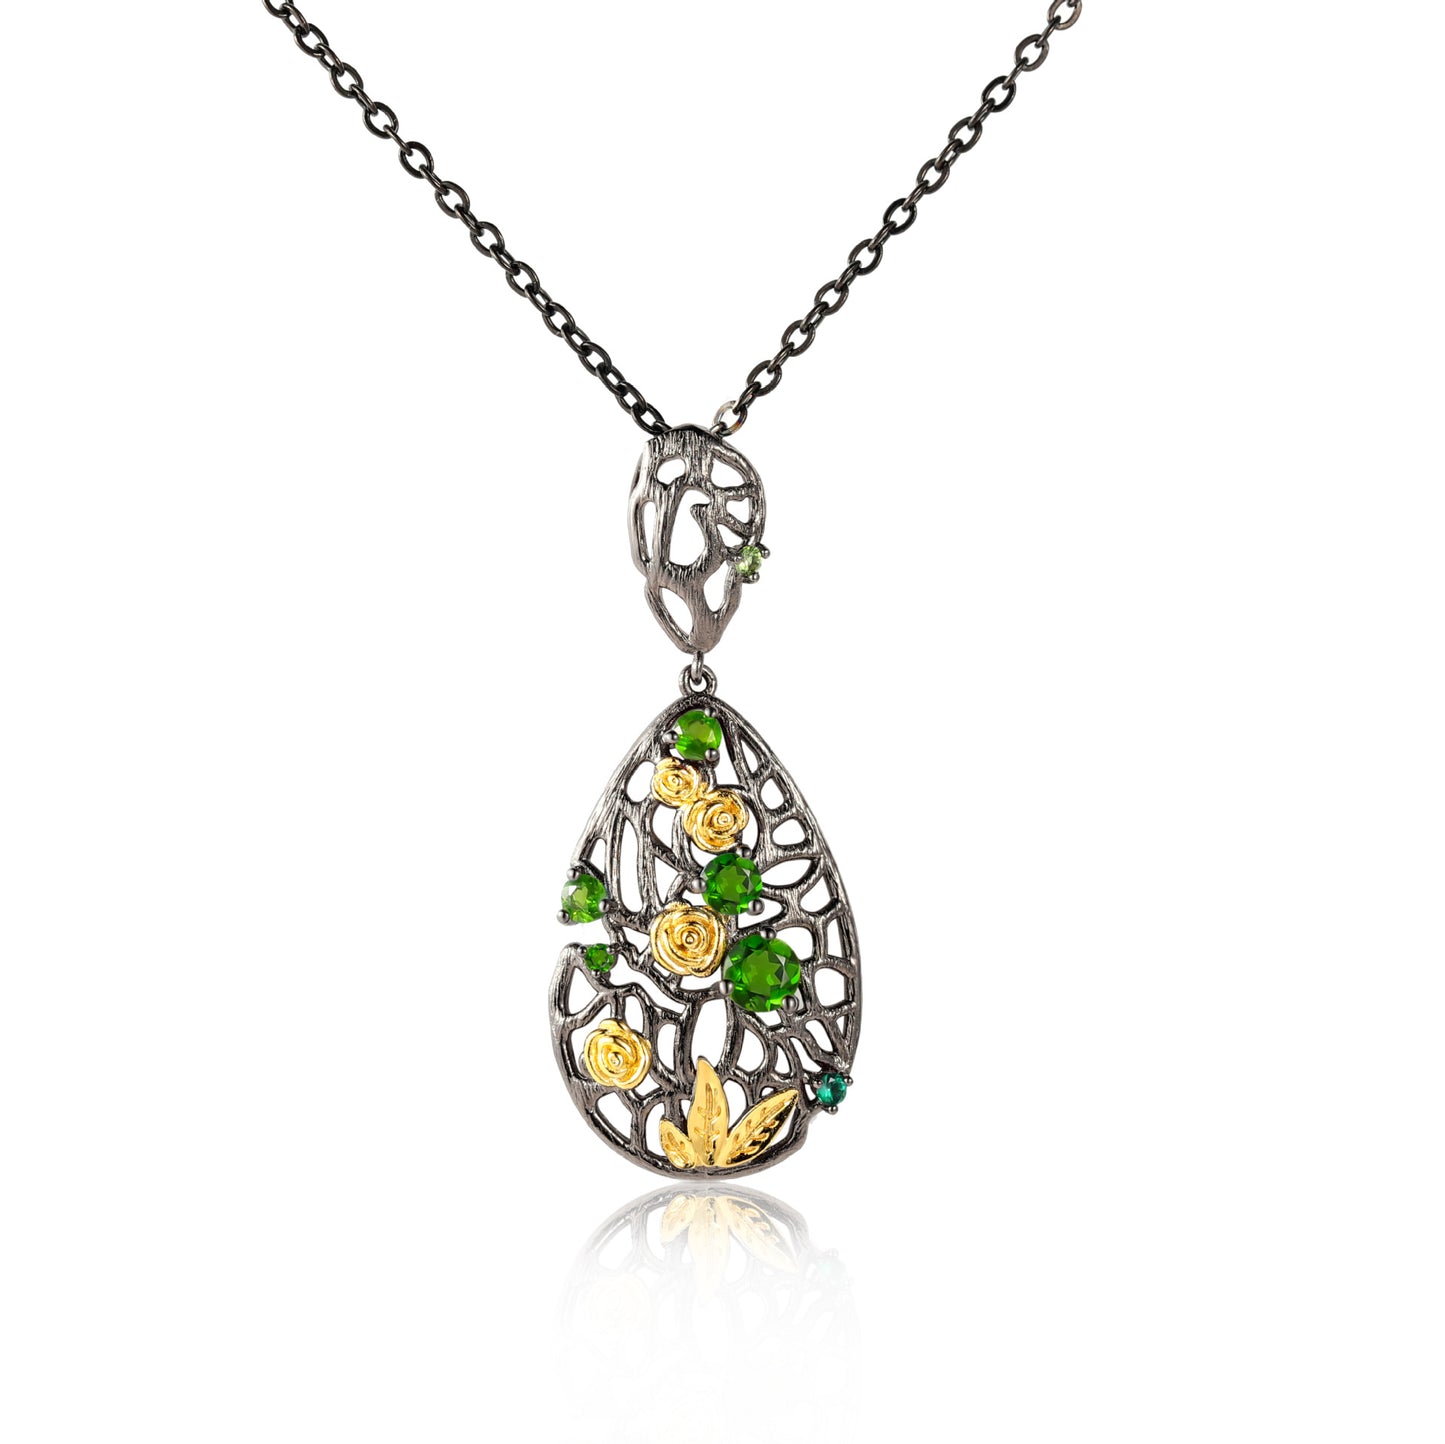 Retro Premium Jewelry Inlaid Colourful Gemstones Rose Garden Pendant Sterling Silver Necklace for Women